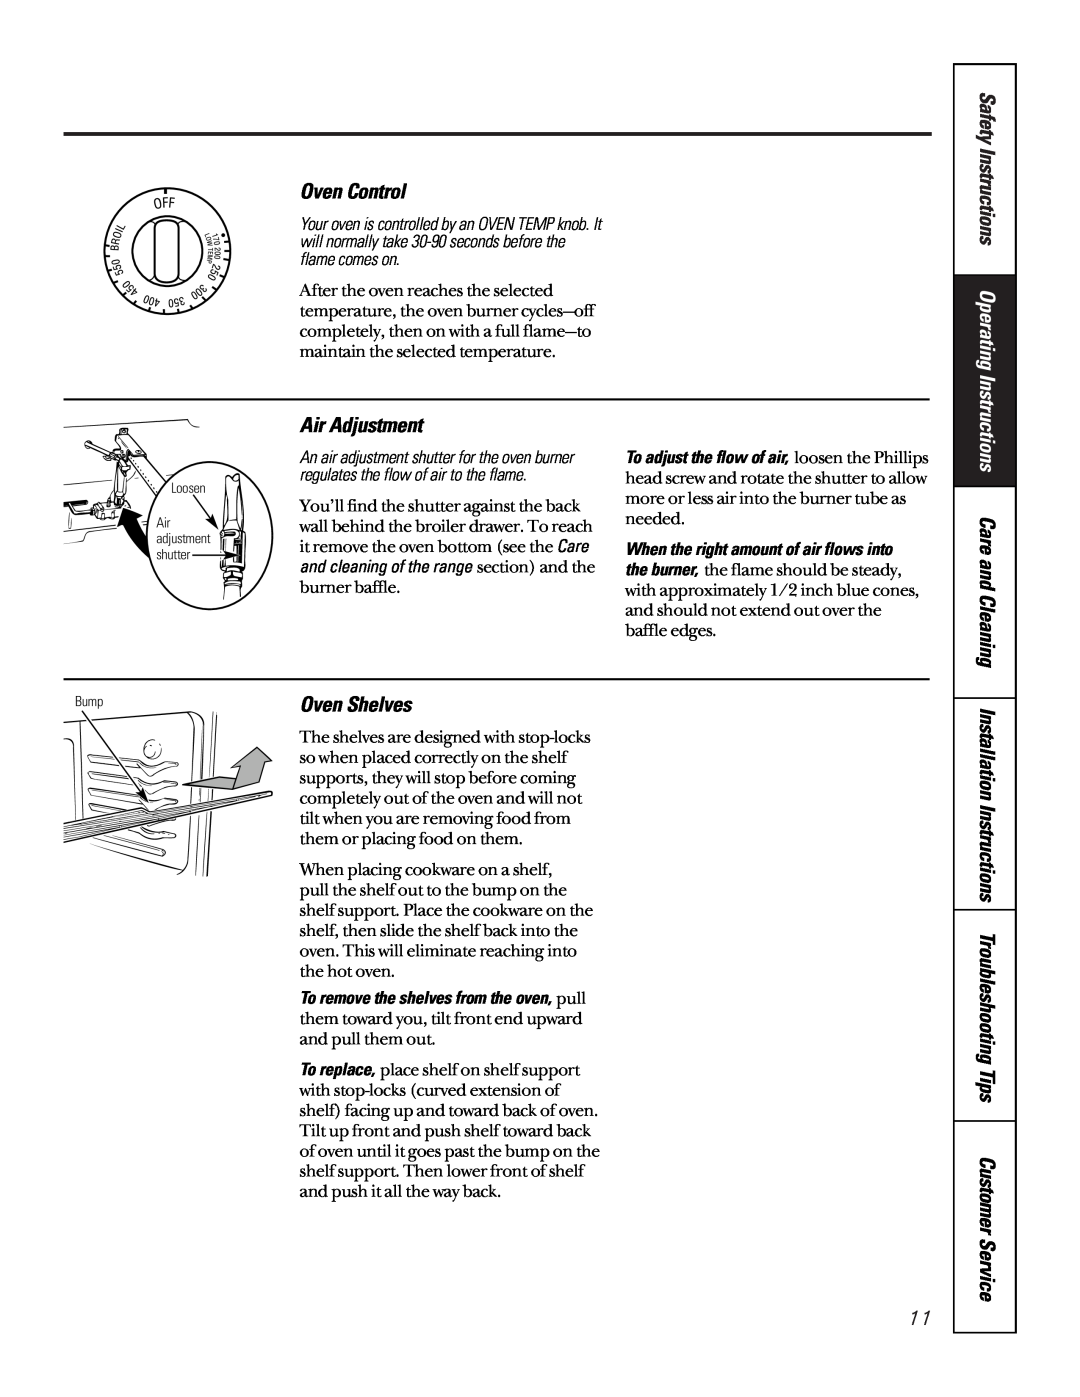 GE 164D3333P185-1 owner manual Oven Control, Oven Shelves, Installation Instructions Troubleshooting Tips Customer Service 